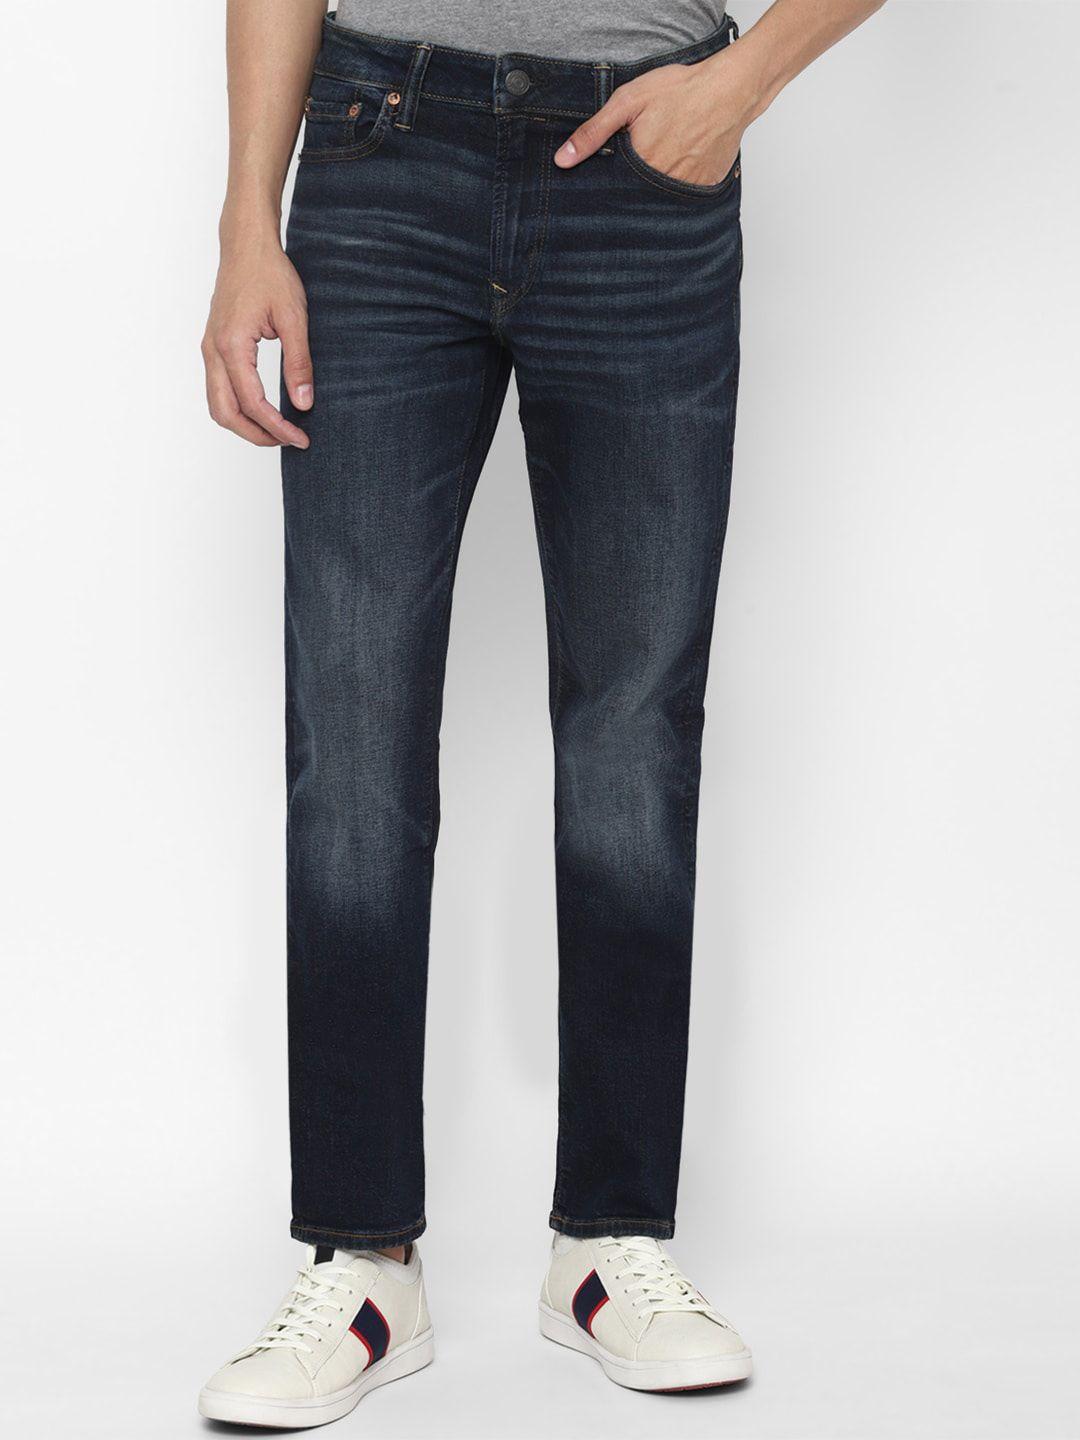 american-eagle-outfitters-men-blue-skinny-fit-low-distress-light-fade-jeans